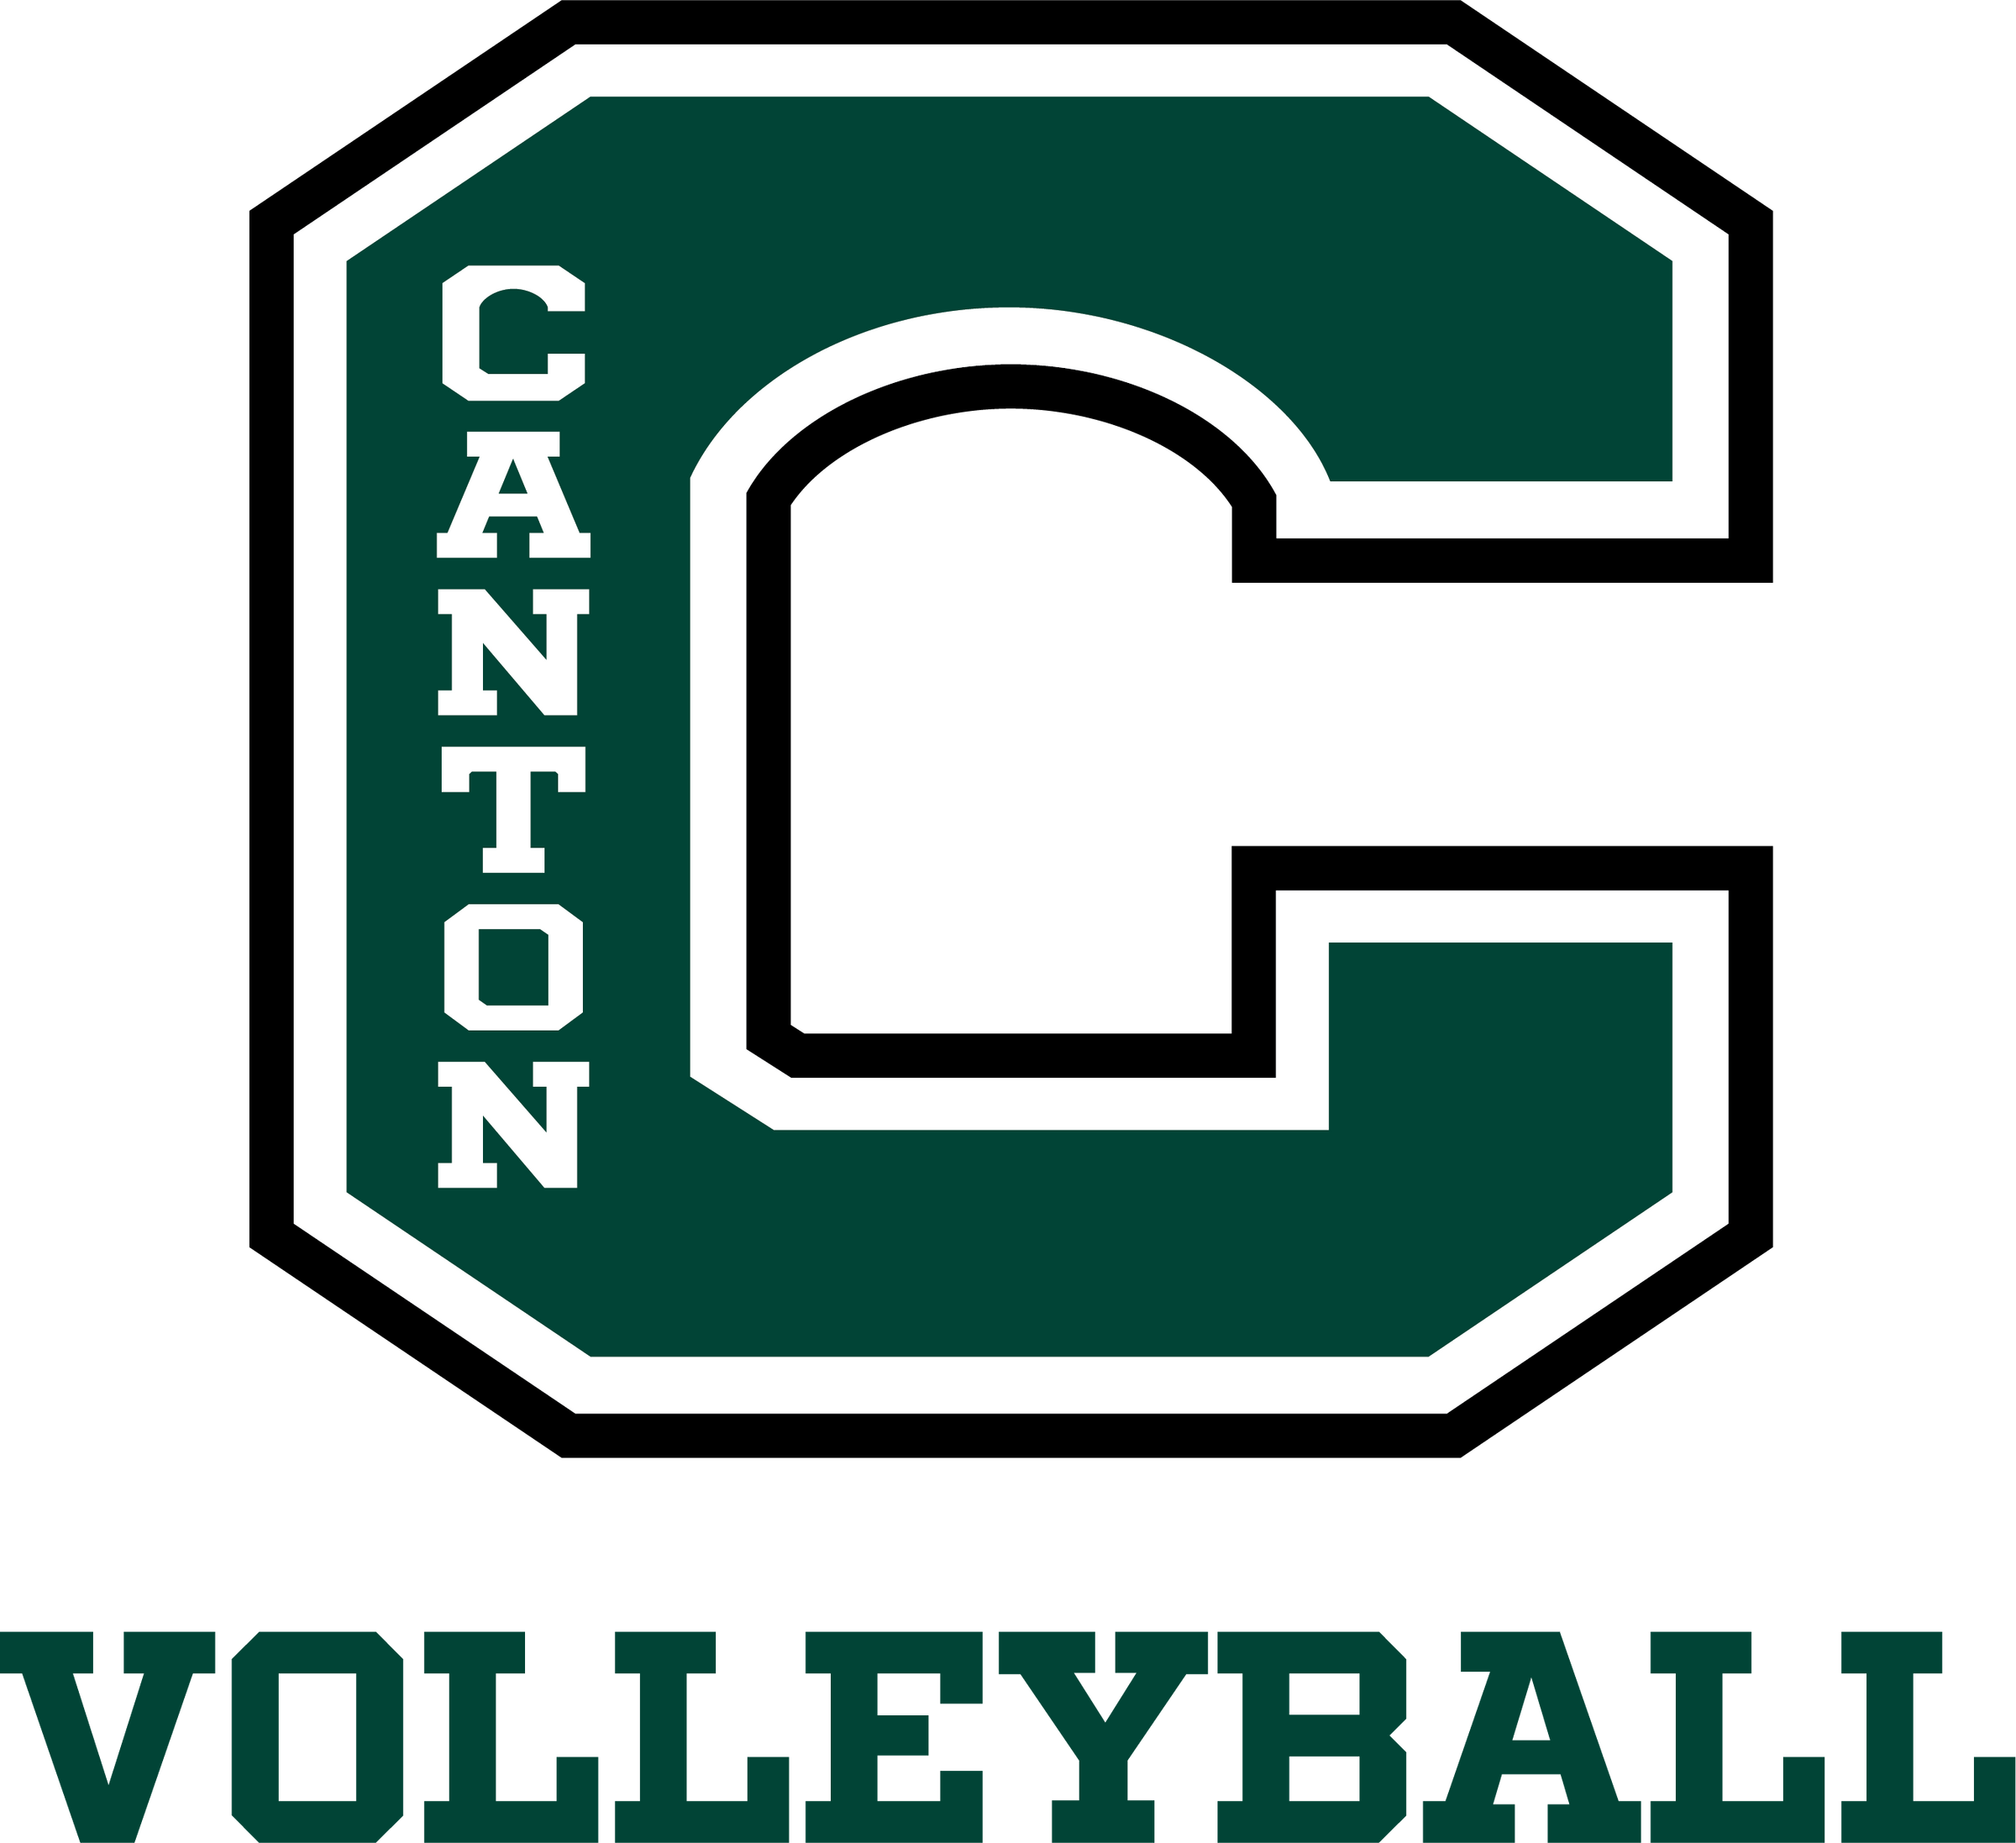 Canton Volleyball